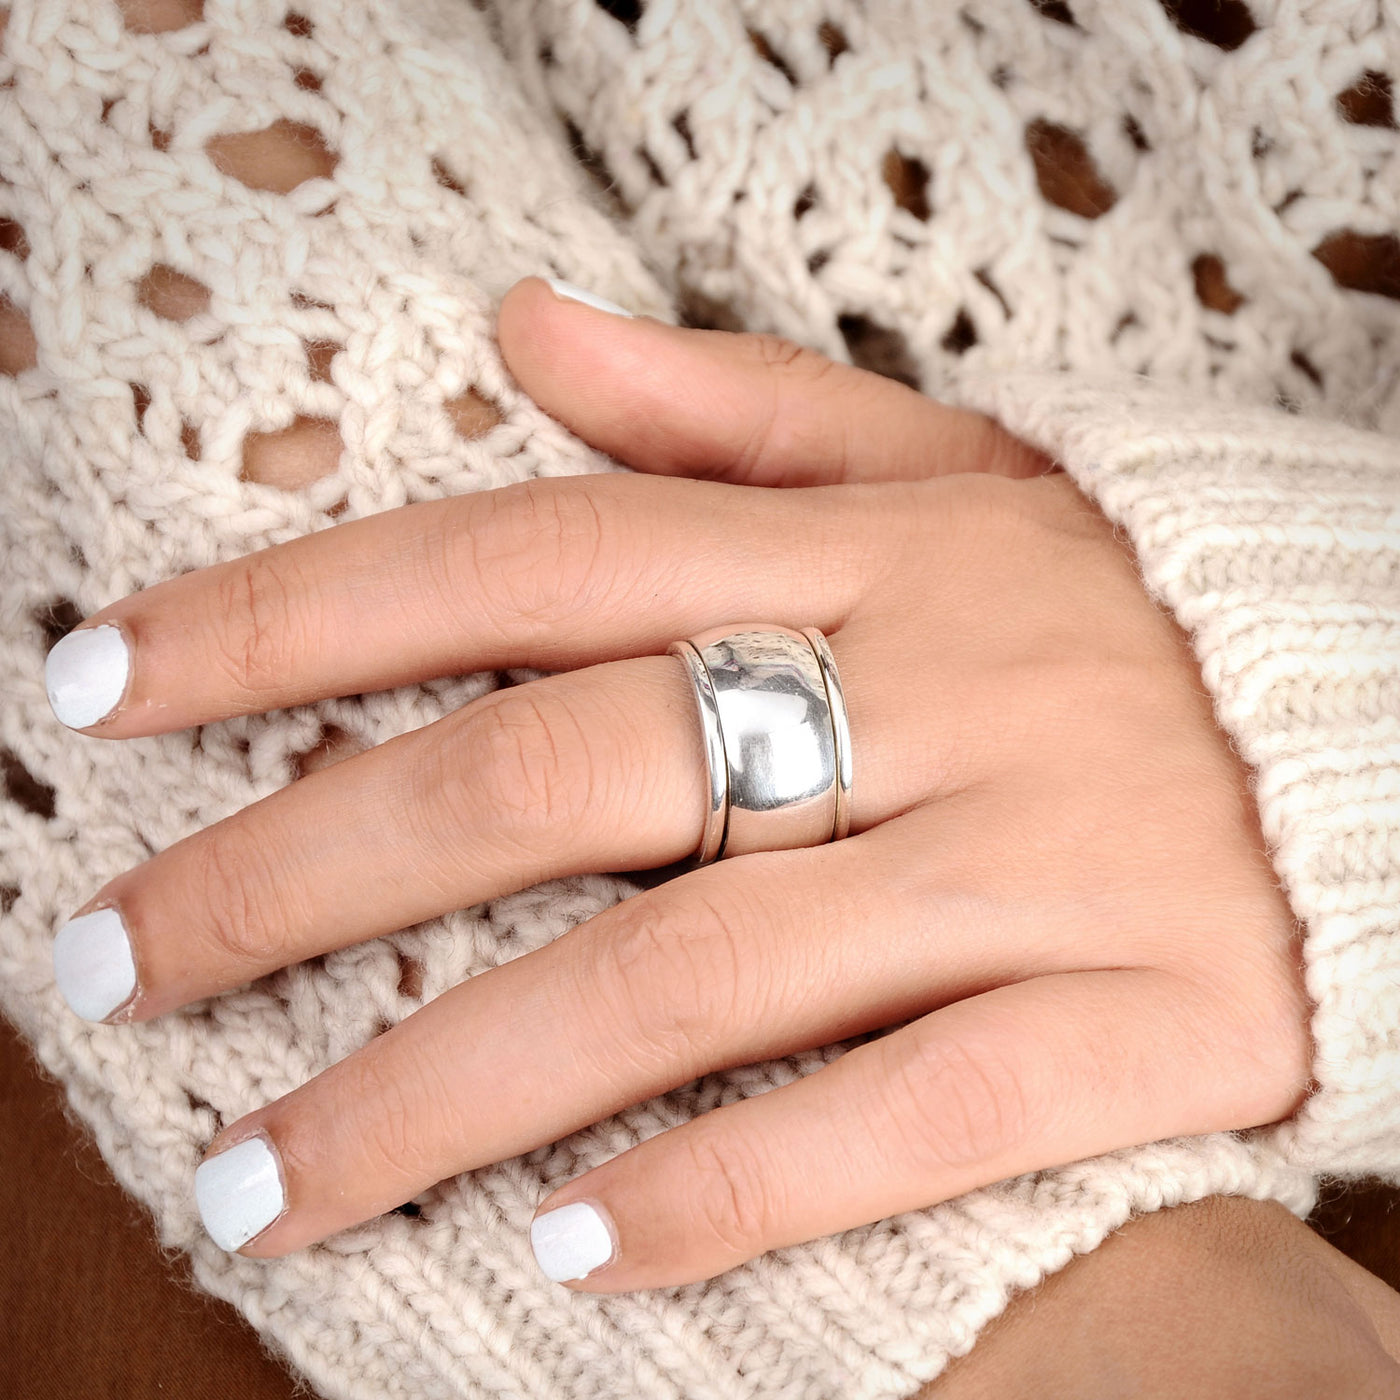 Sterling Silver Meditation Spin Dome Ring